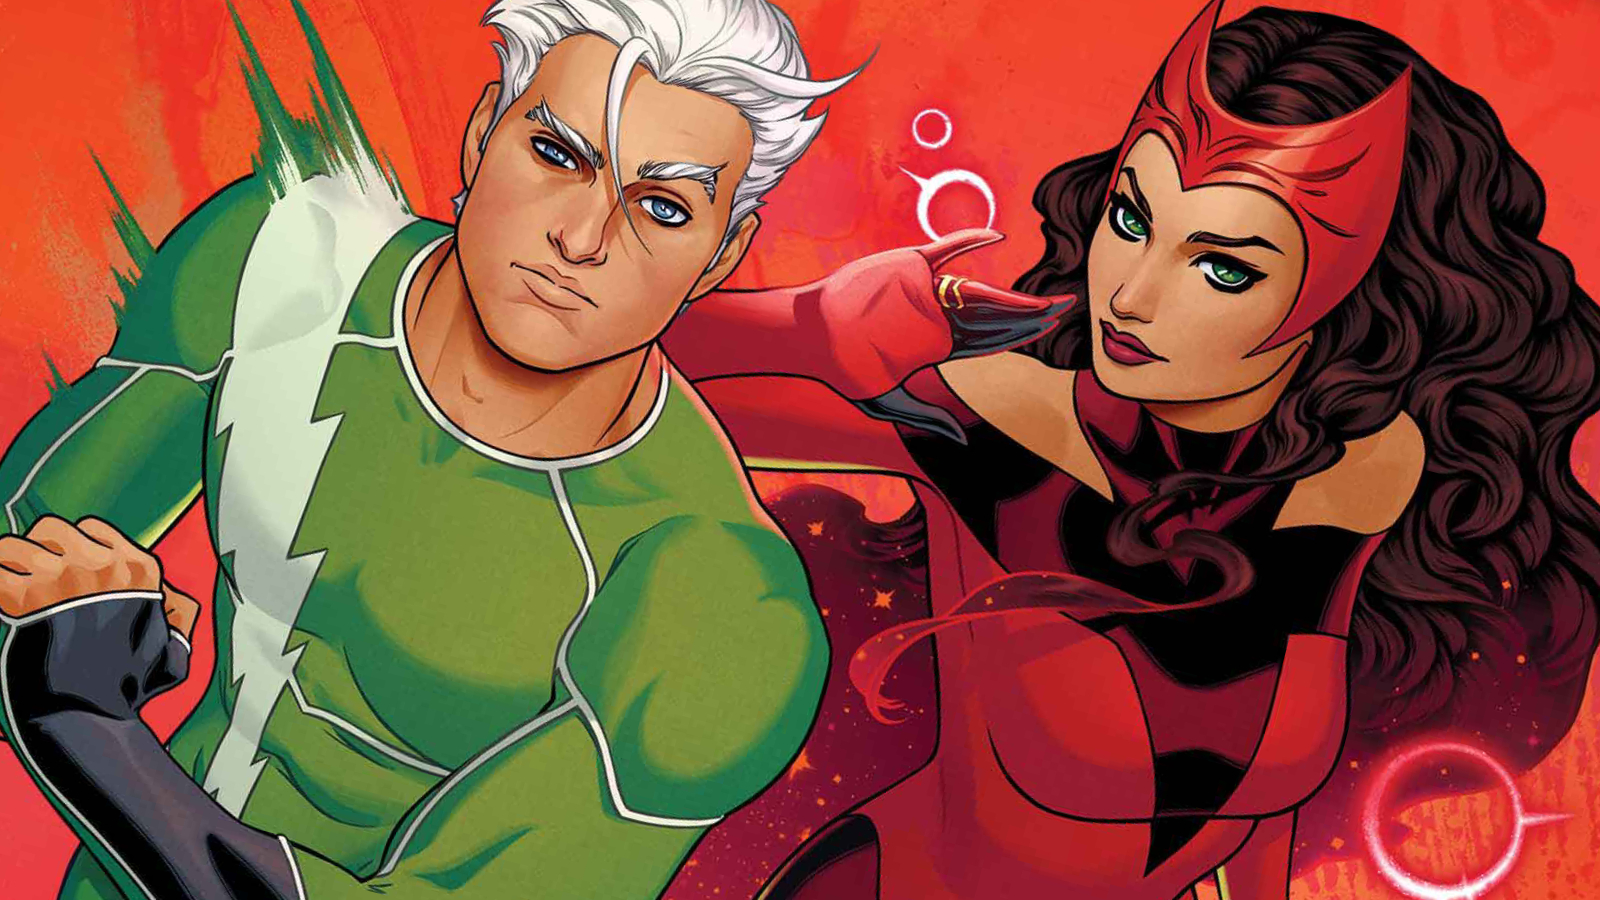 Quicksilver and Scarlet Witch's New Comic Book Origin Revealed - IGN